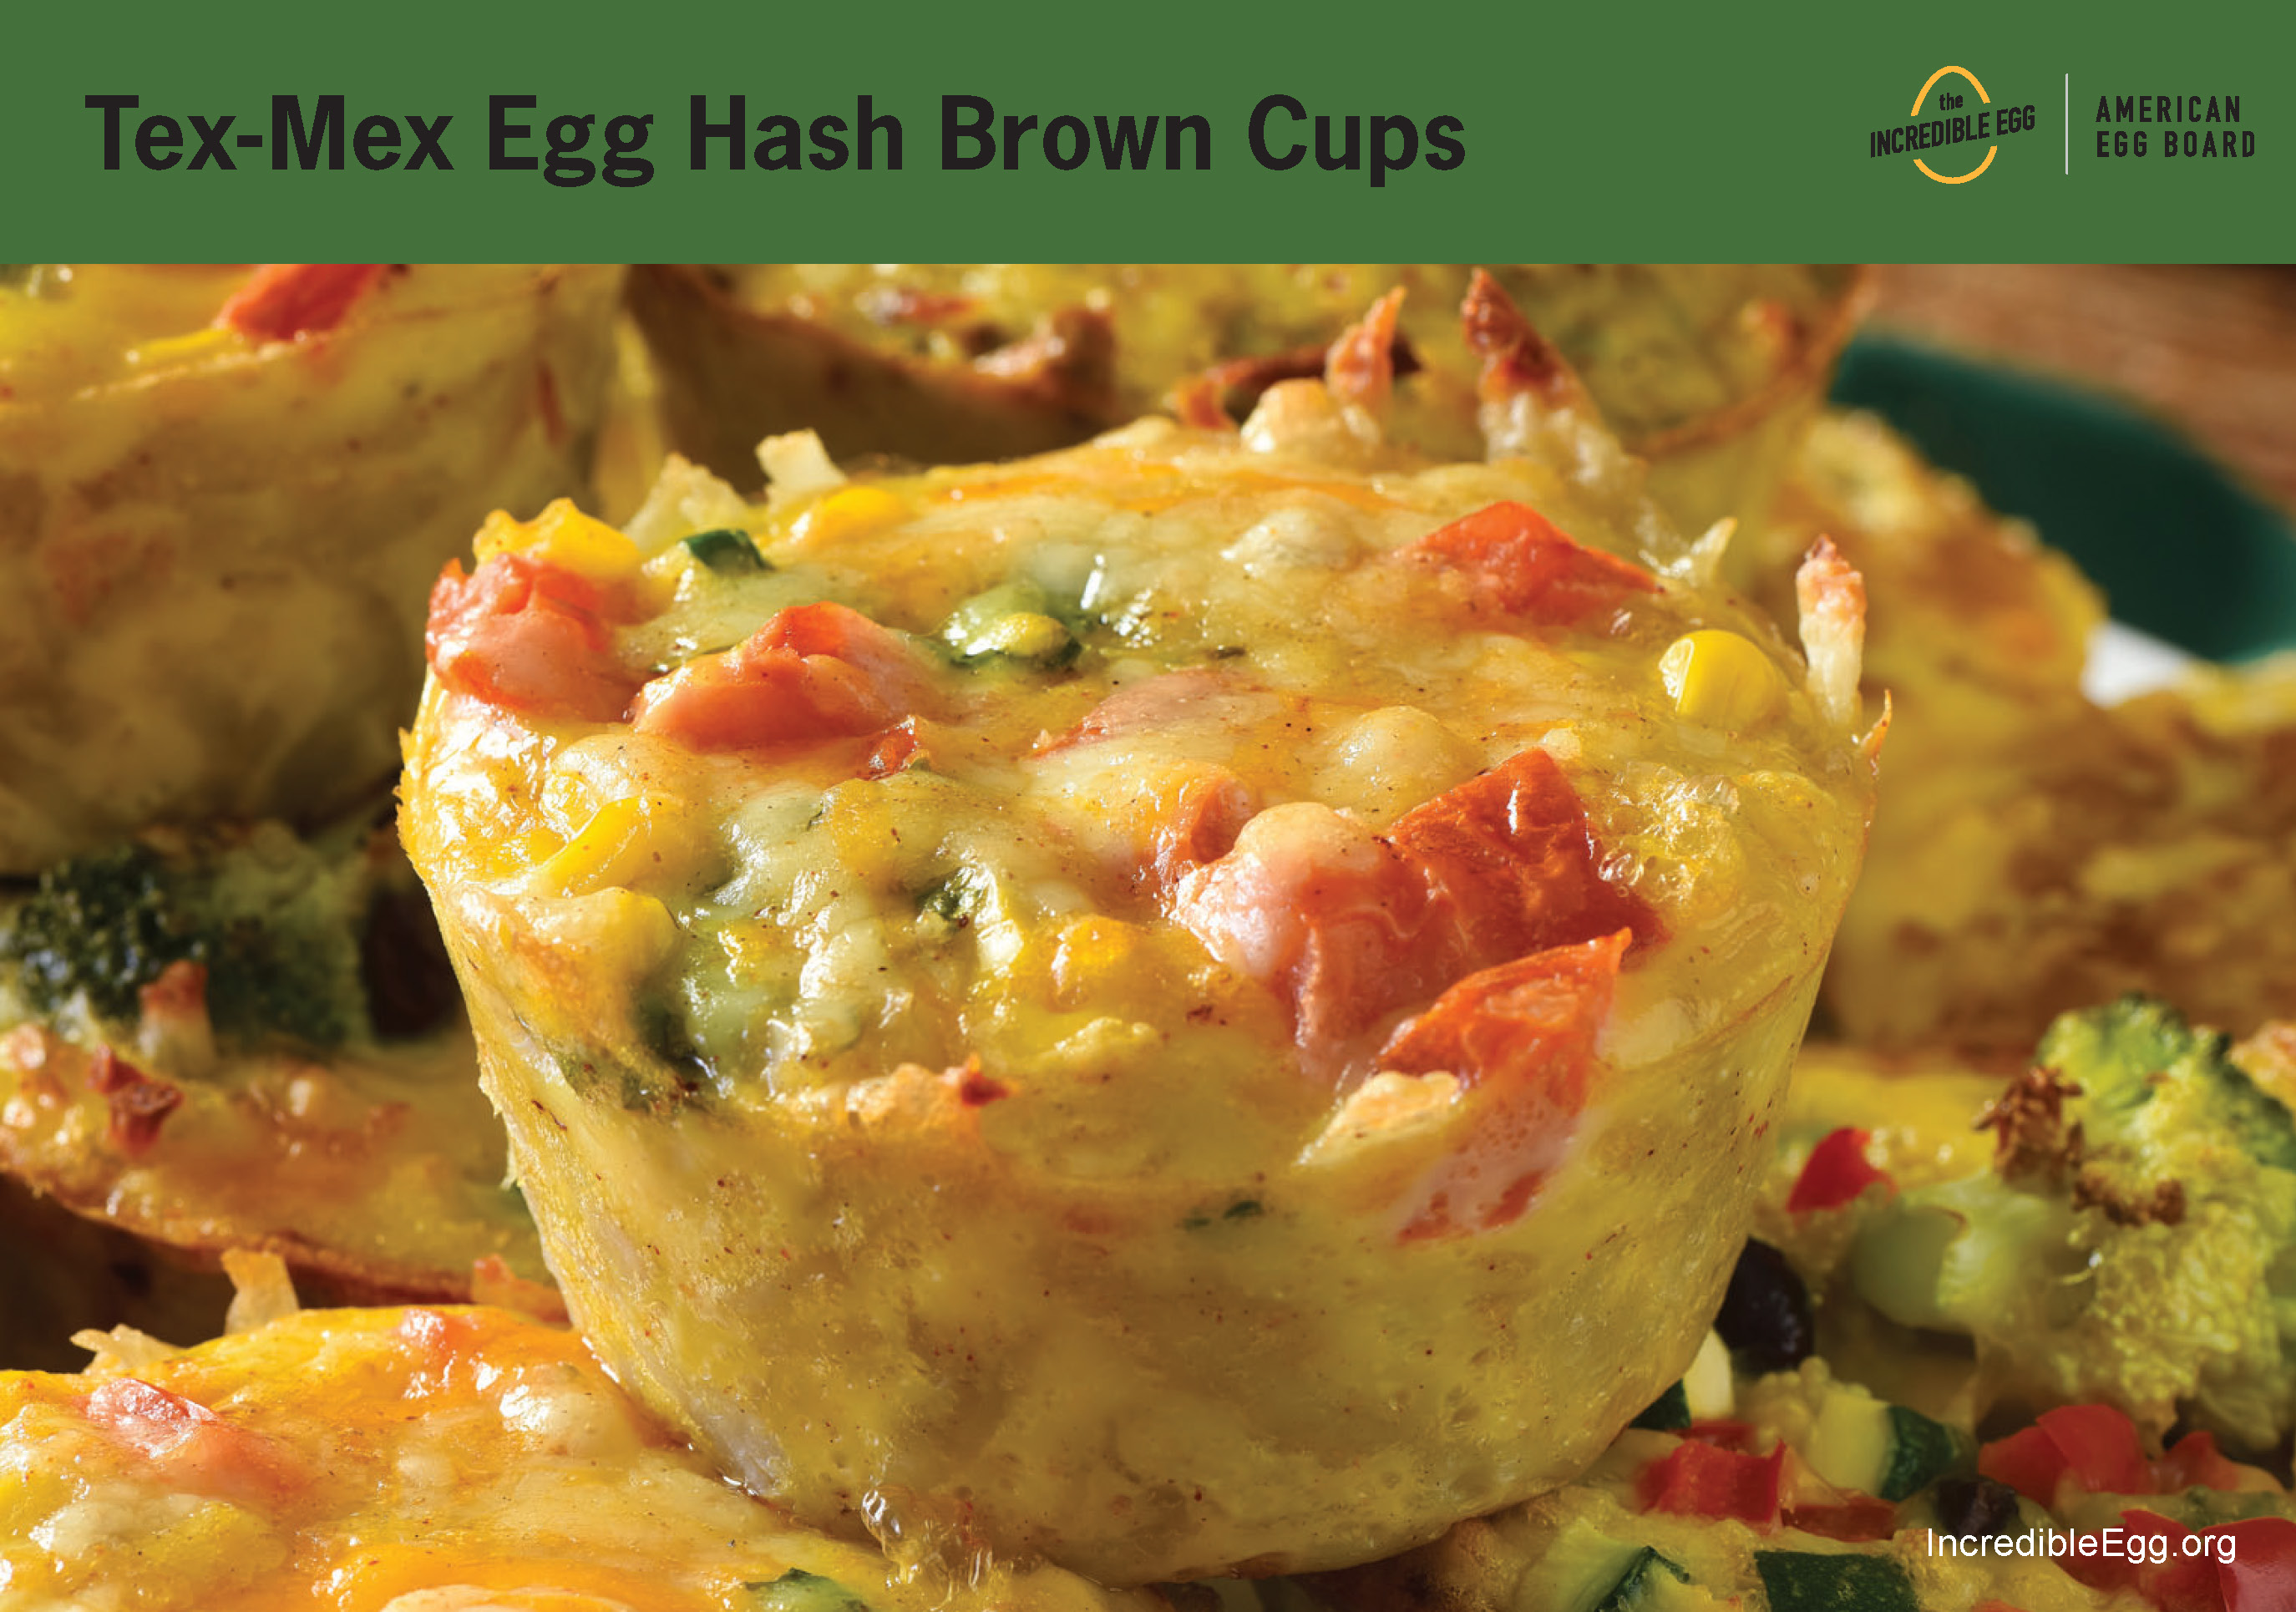 Tex-Mex Egg Hash Brown Cups Recipe Cards